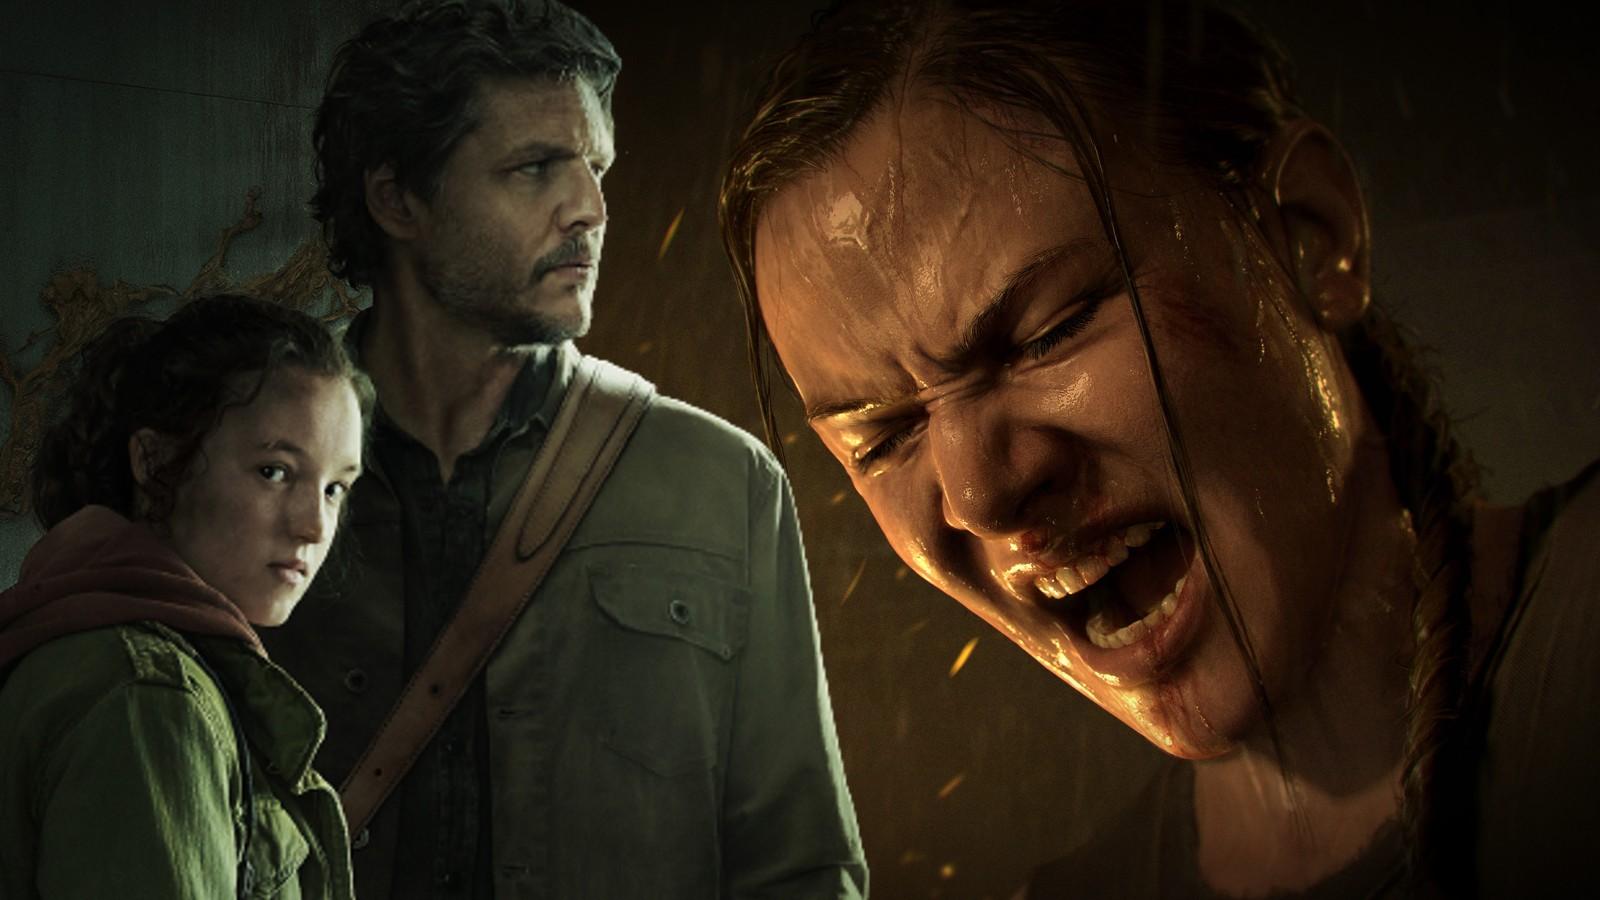 The Last of Us HBO Series Casts Sarah, Joel's Daughter - IGN